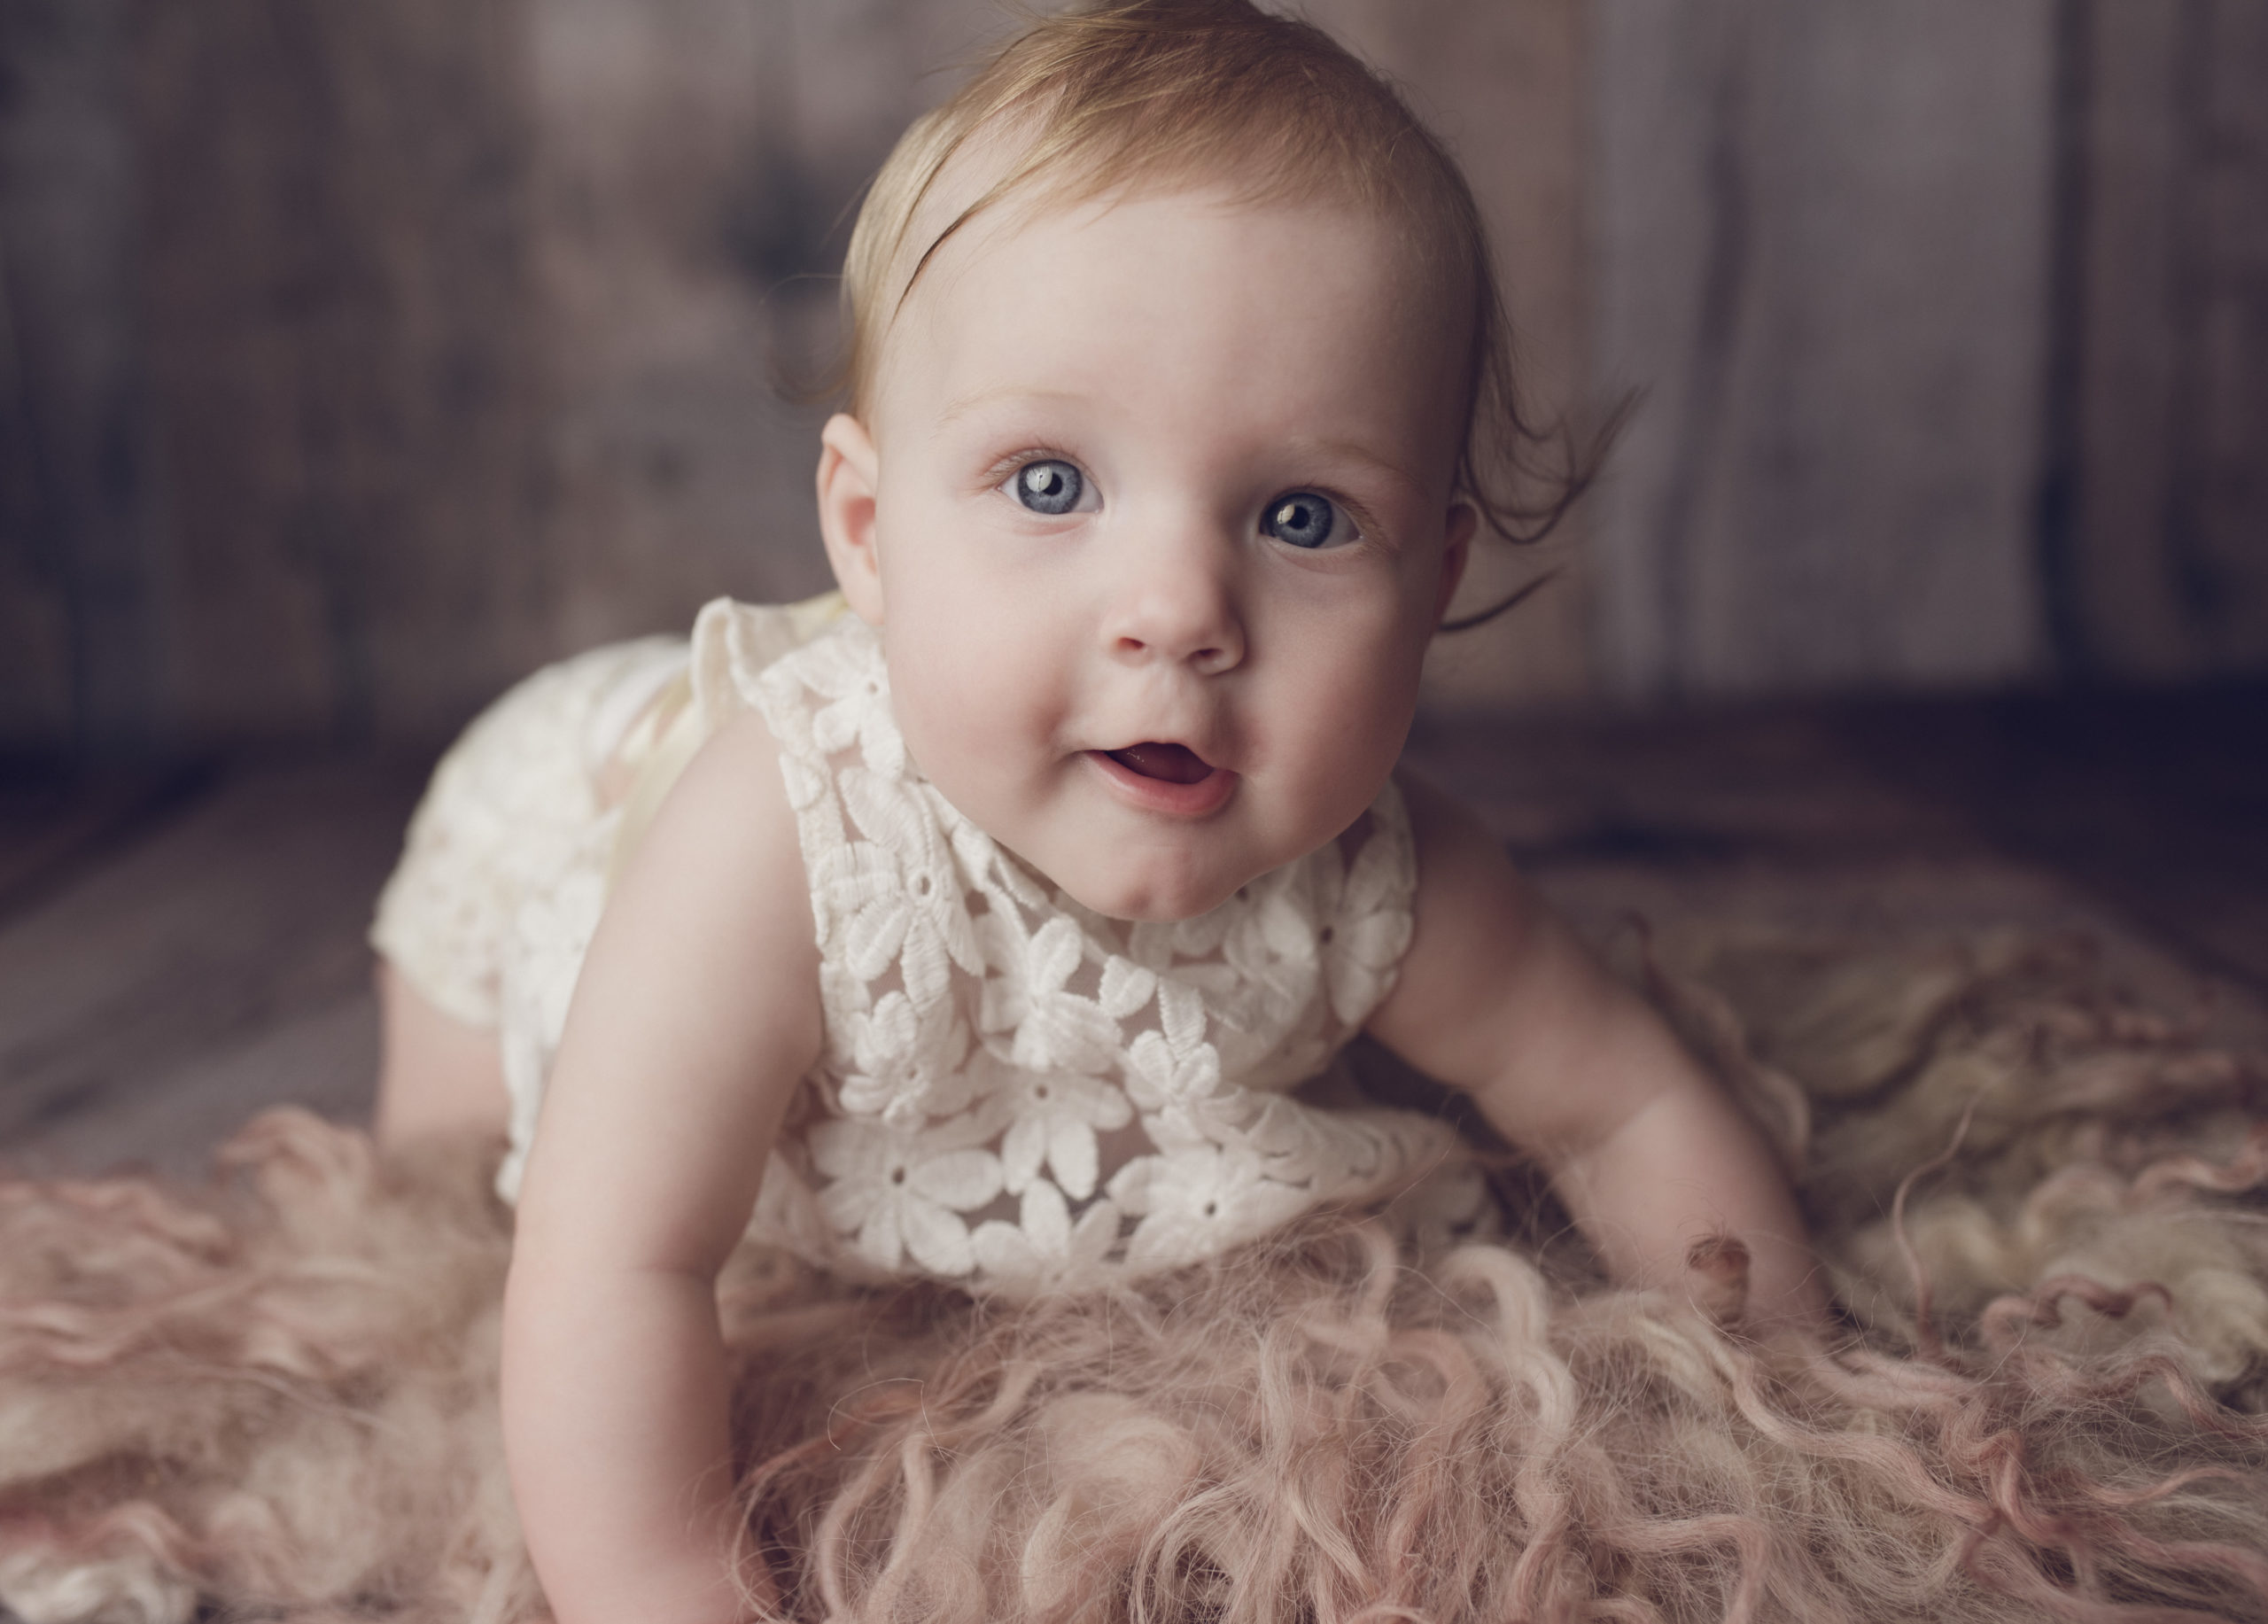 grand rapids milestone photography shoot 6 month sitter session girl with blue eyes